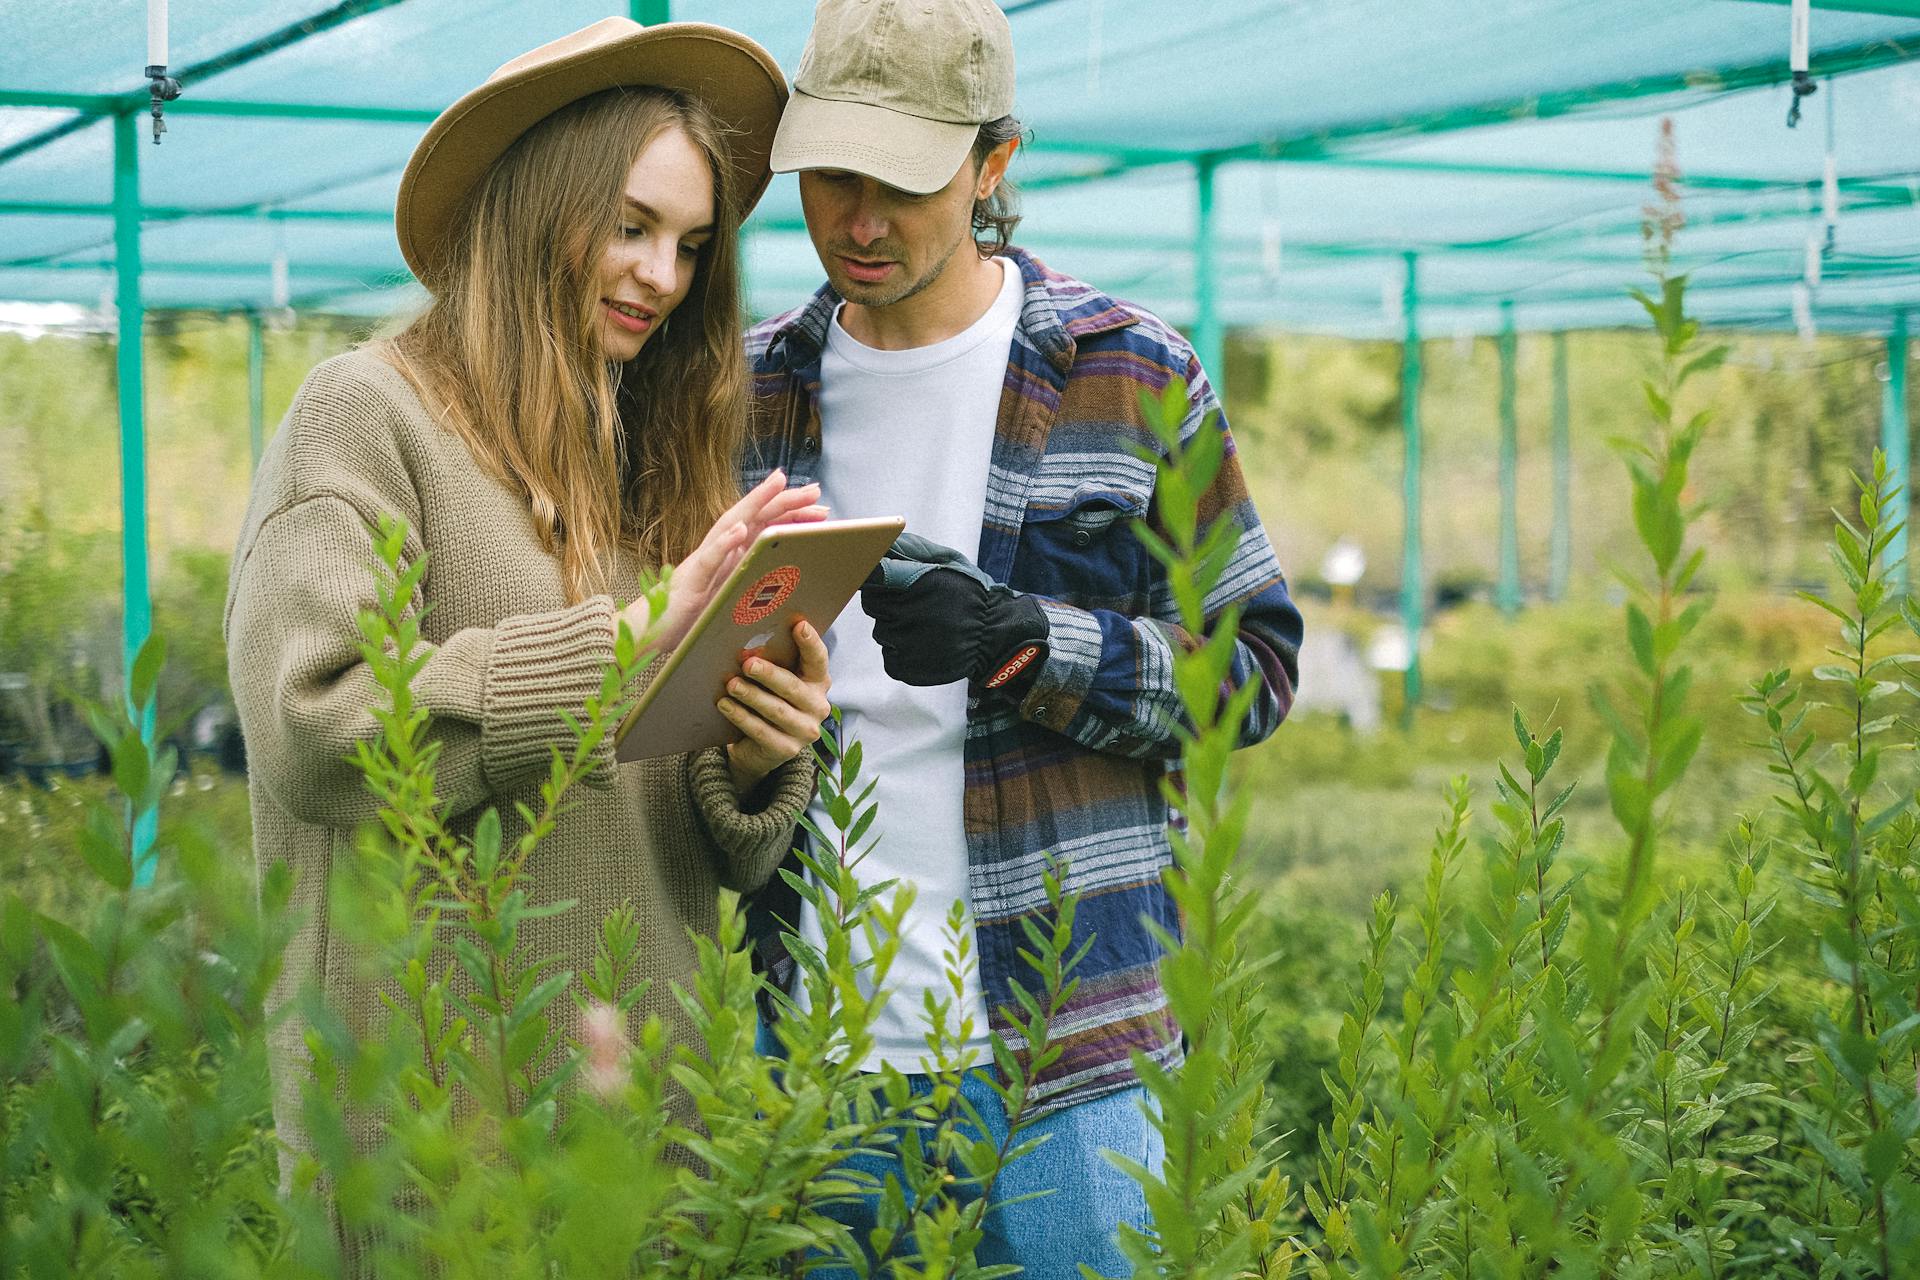 Focused couple searching information in farm